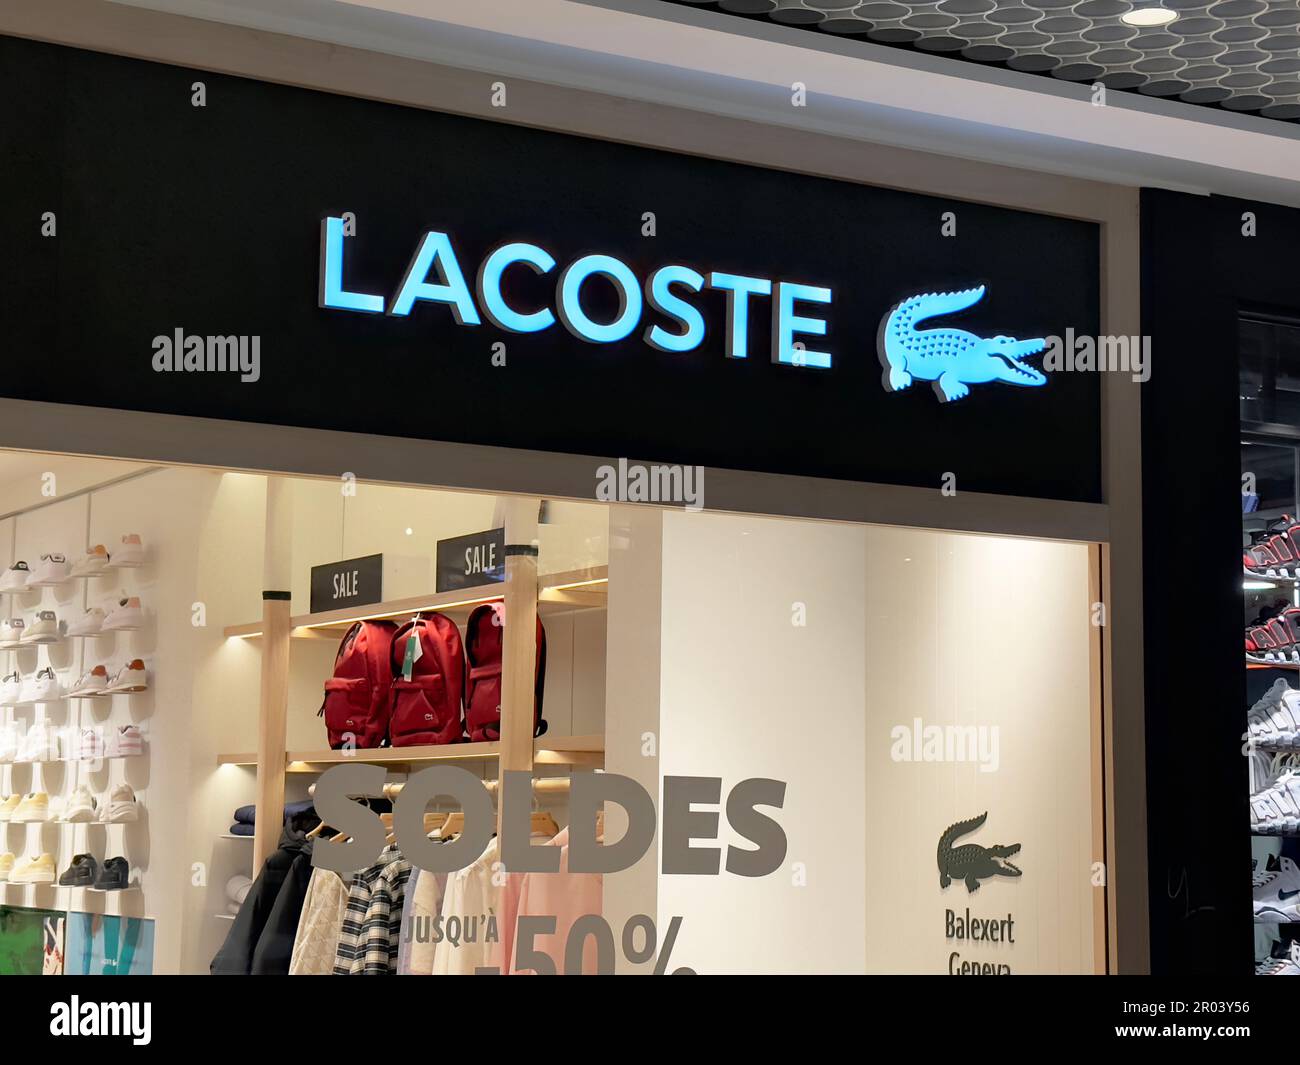 Geneva, Switzerland - Jan 11, 2023: Lacoste store in Geneva. Lacoste S.A. is a French company, founded in 1933 by tennis player René Lacoste. Stock Photo